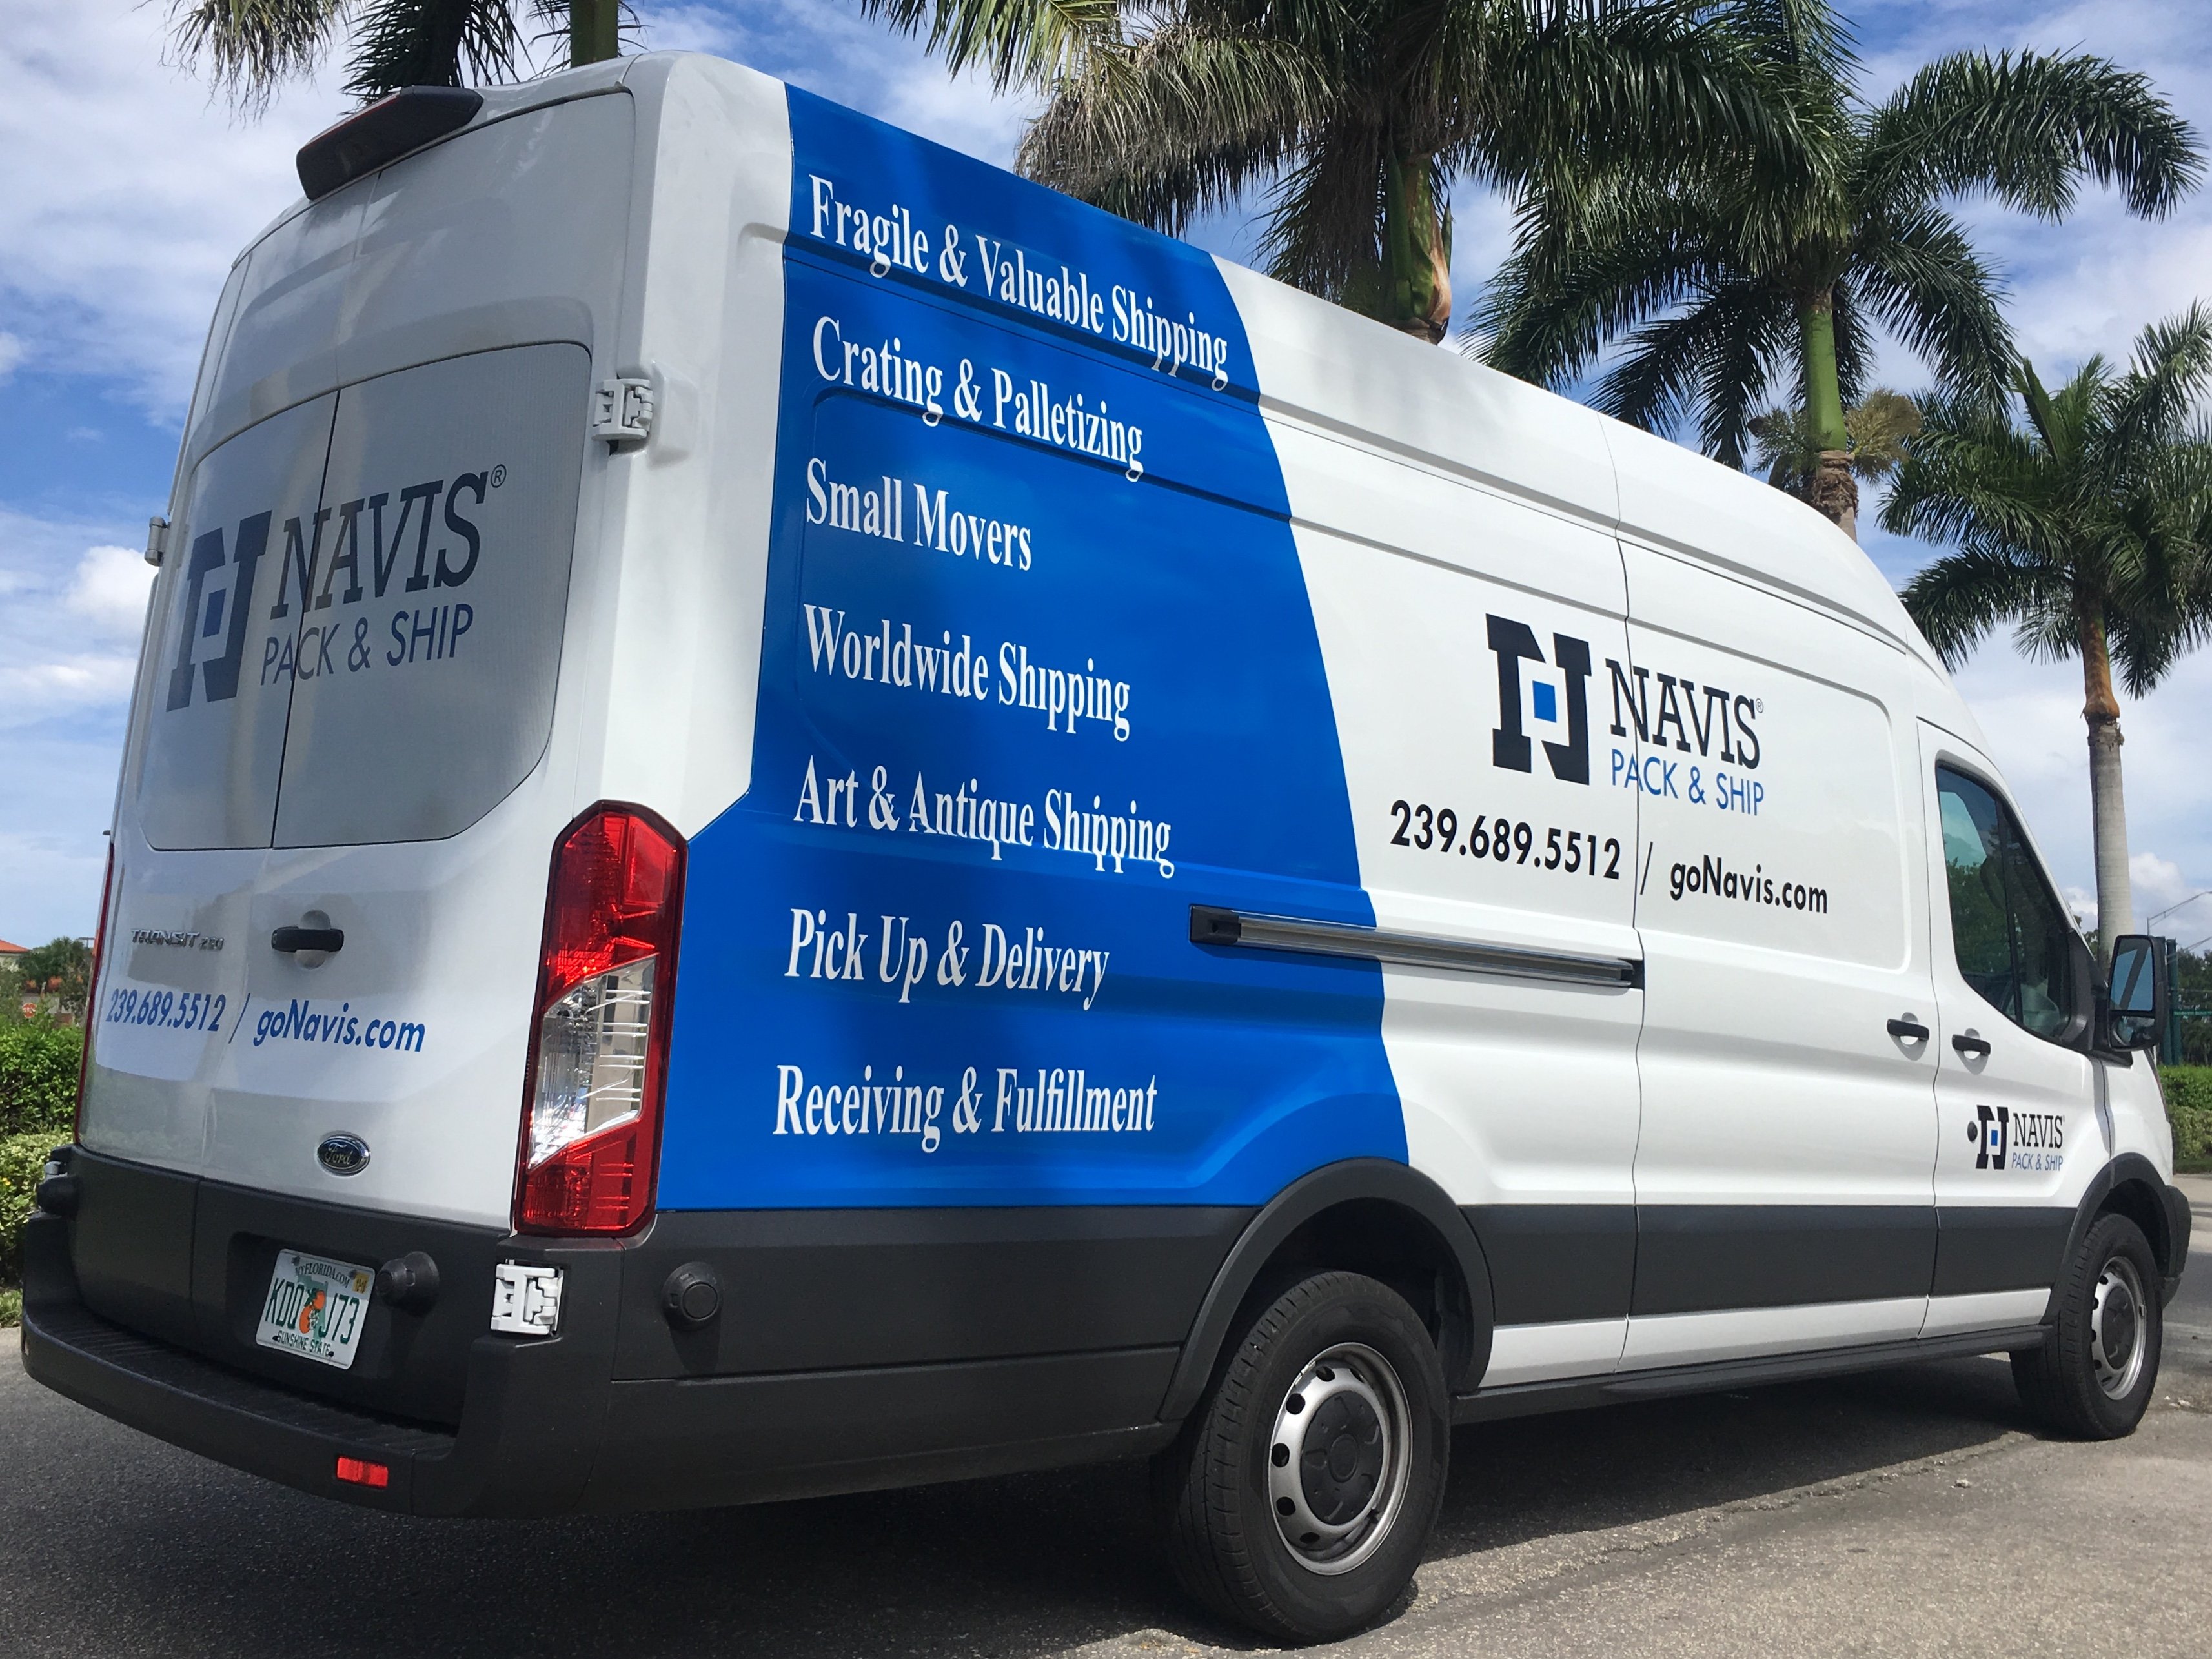 Pack and Ship Services in Fort Lauderdale, Broward County and throughout South Florida